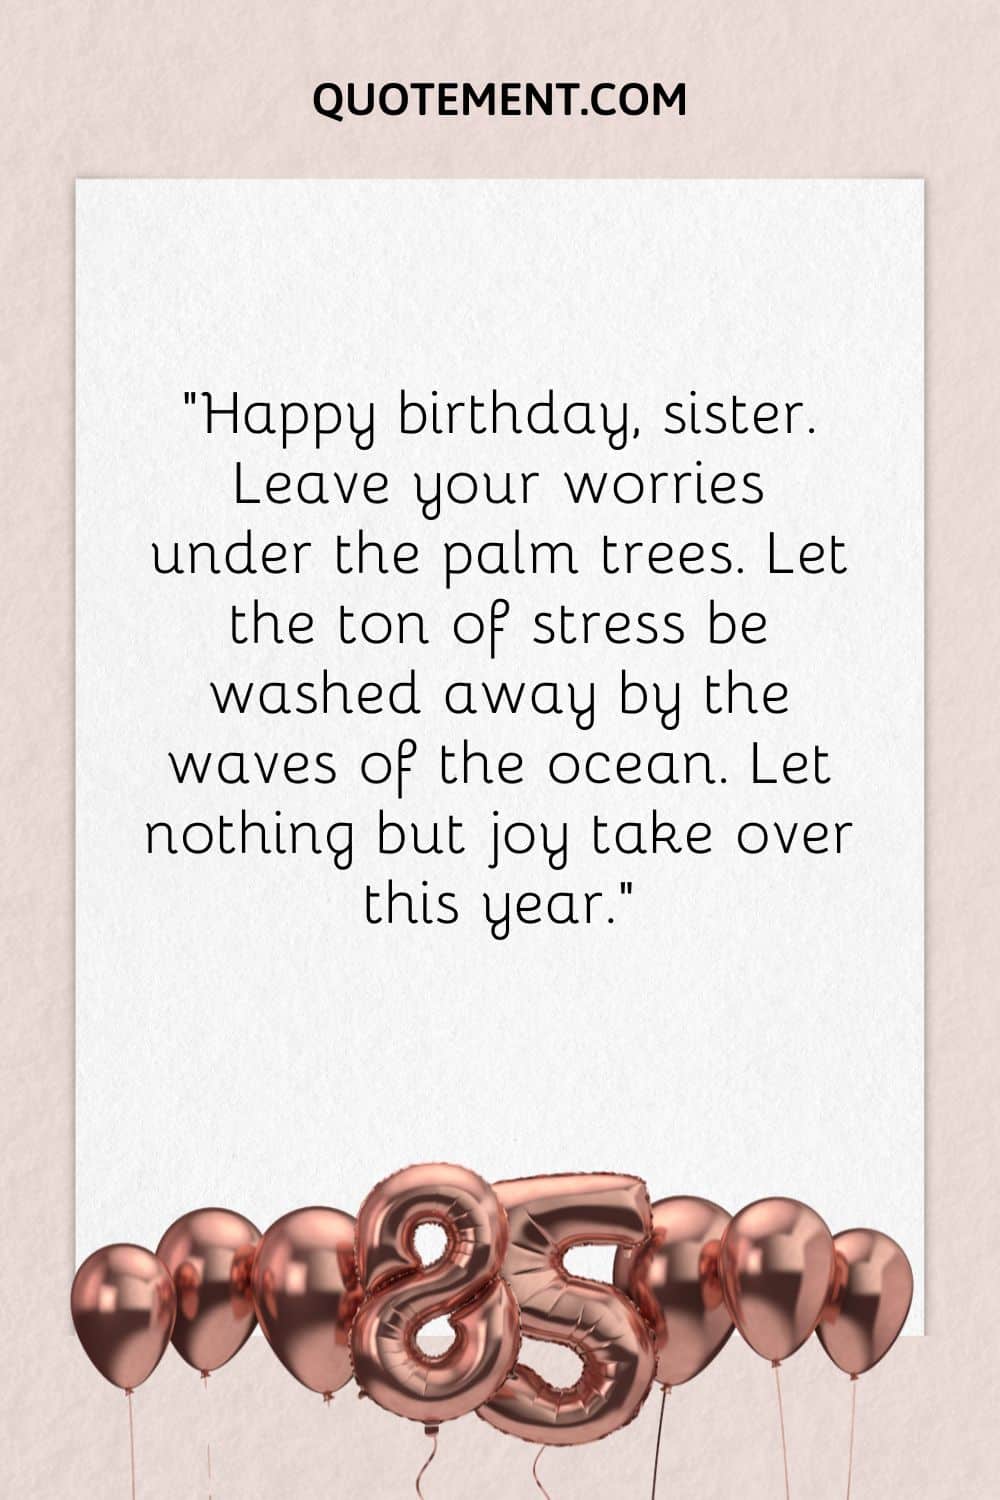 “Happy birthday, sister. Leave your worries under the palm trees. Let the ton of stress be washed away by the waves of the ocean. Let nothing but joy take over this year.”